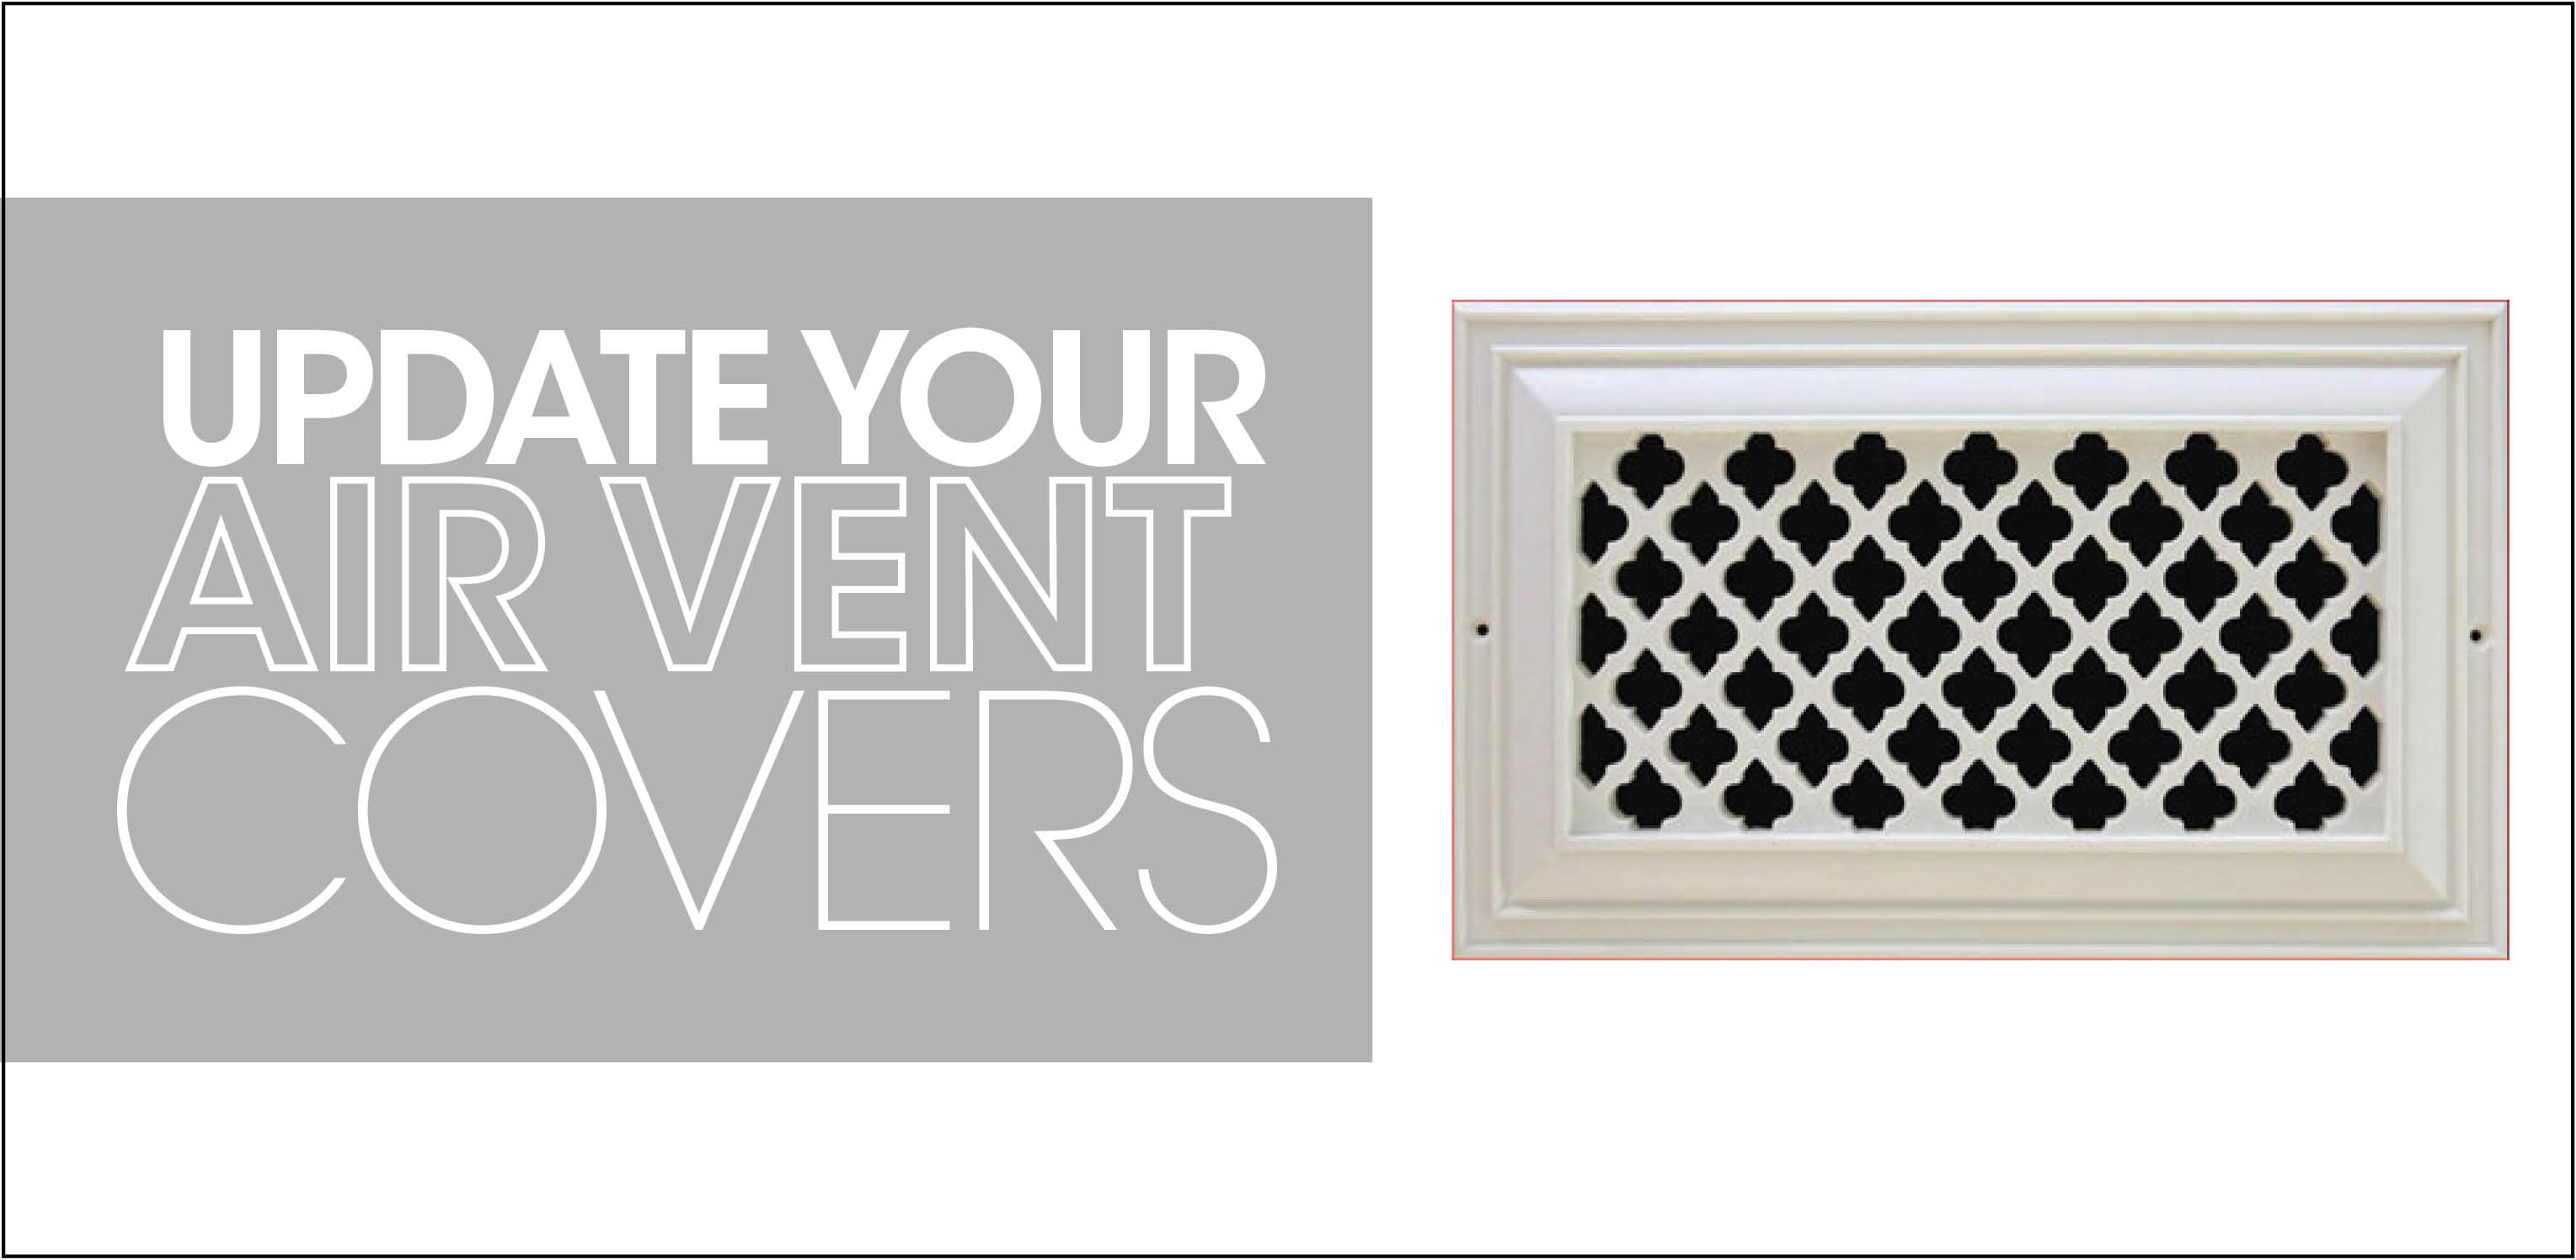 update your air vent covers - air vent cover